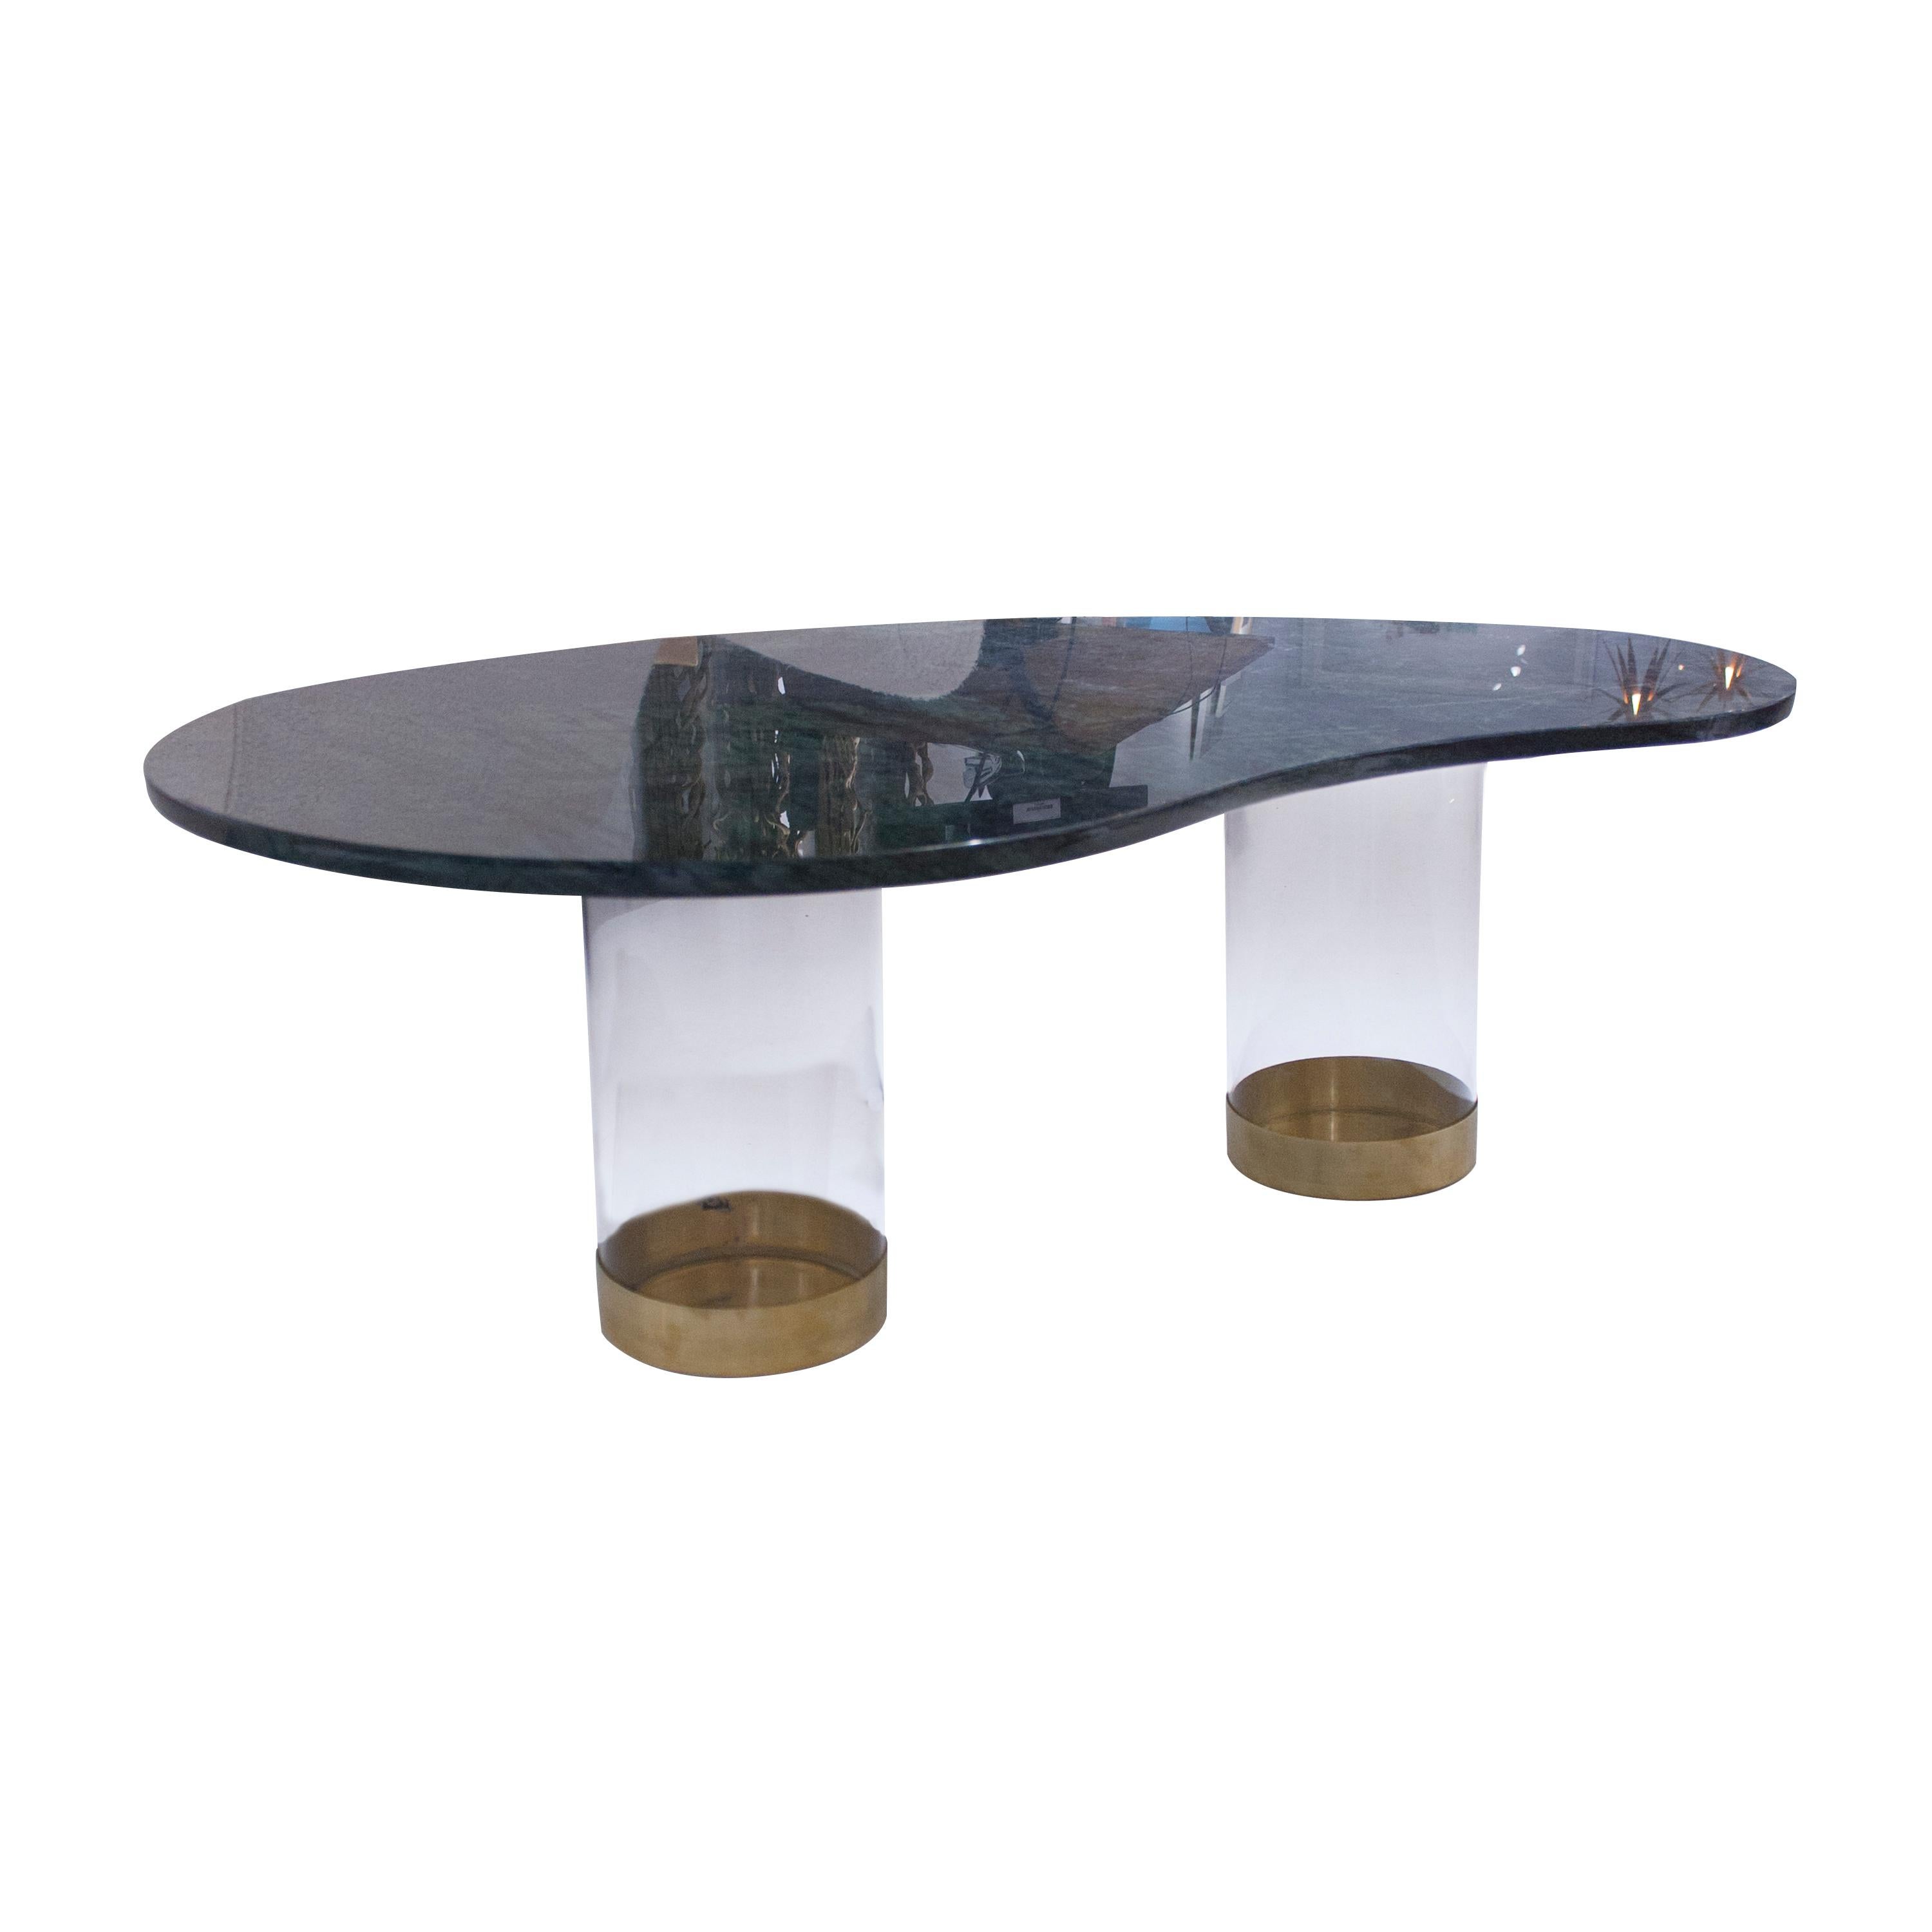 Contemporary center table designed and produced by IKB191 composed of a kidney shaped top in gtreen marble and a methacrylate structure with brass details.
  